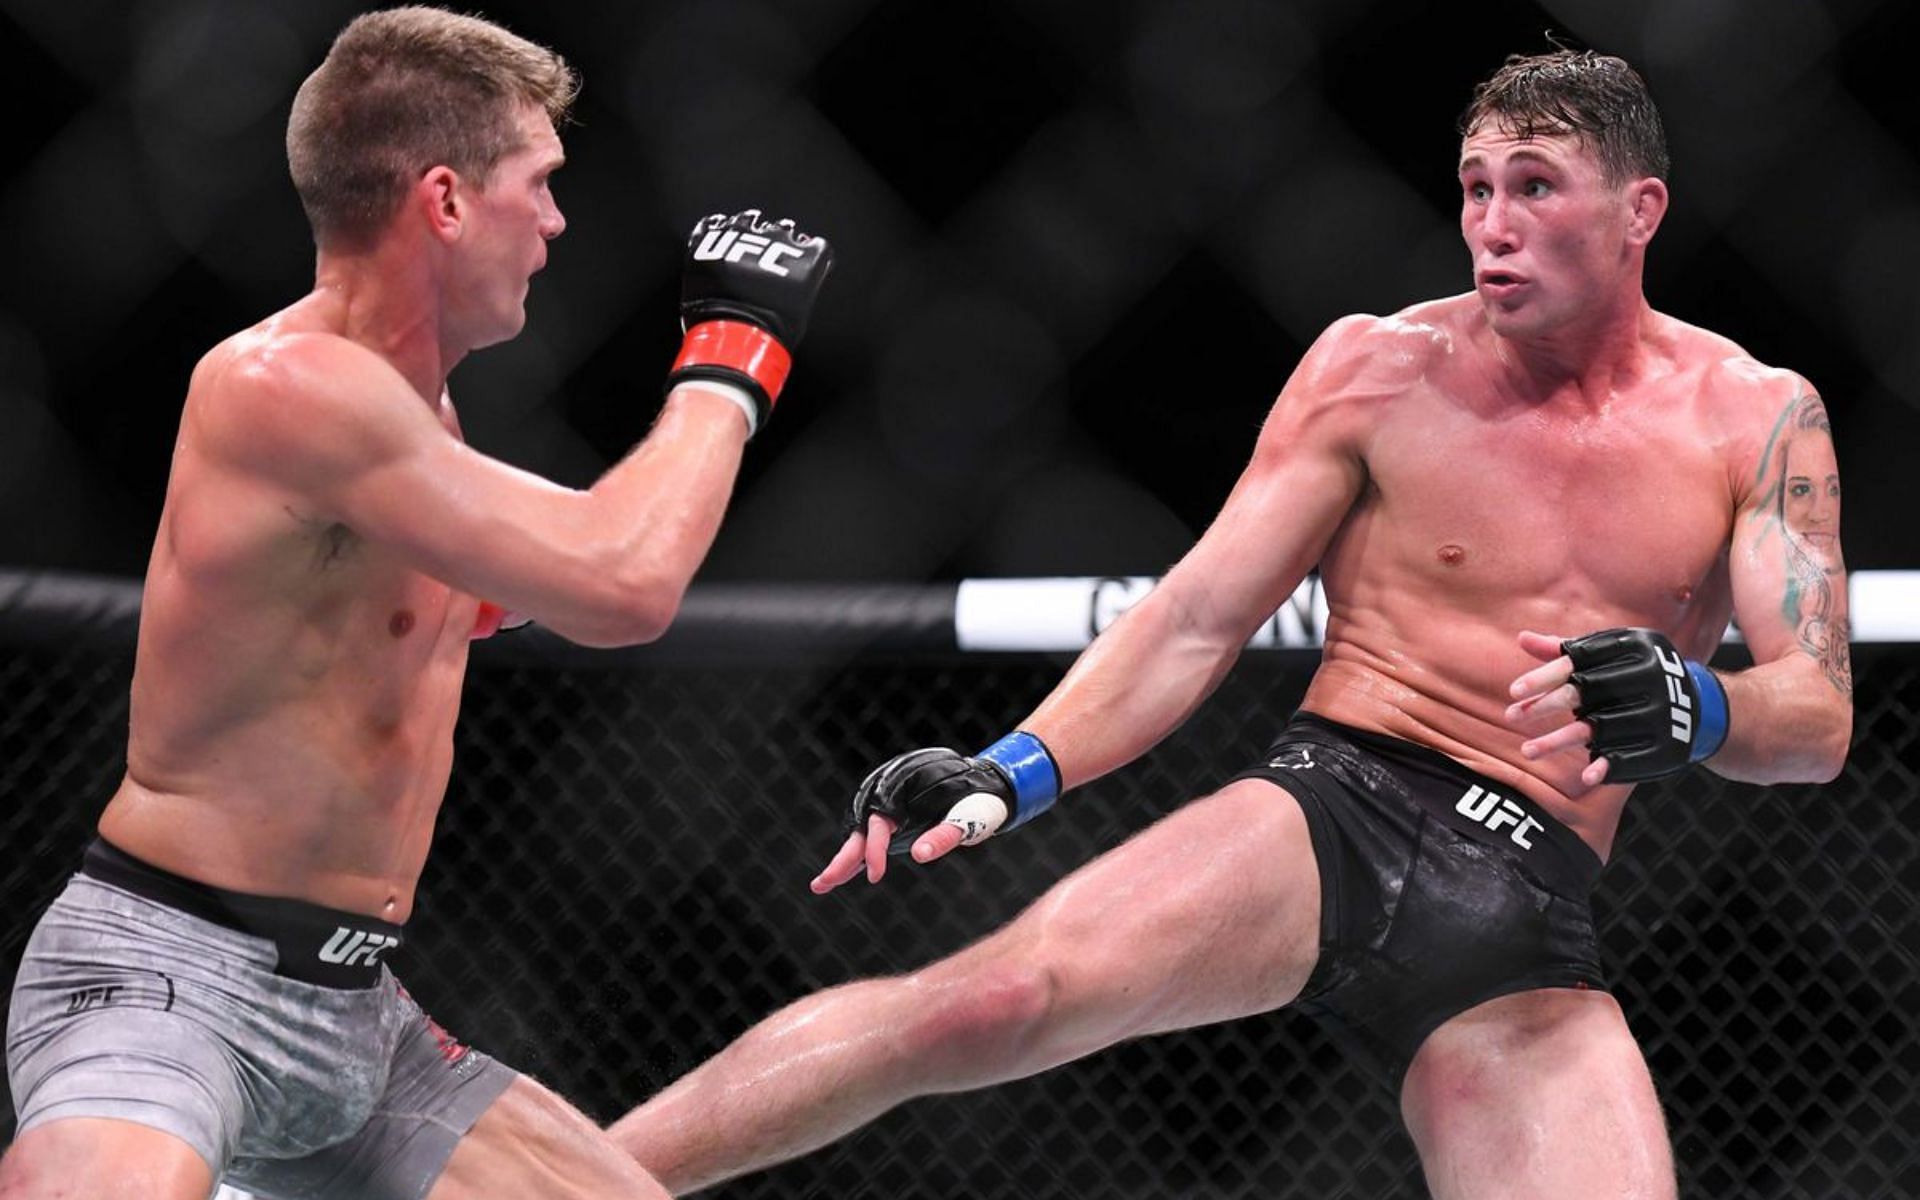 Darren Till won big against Stephen Thompson in front of his home fans in 2018